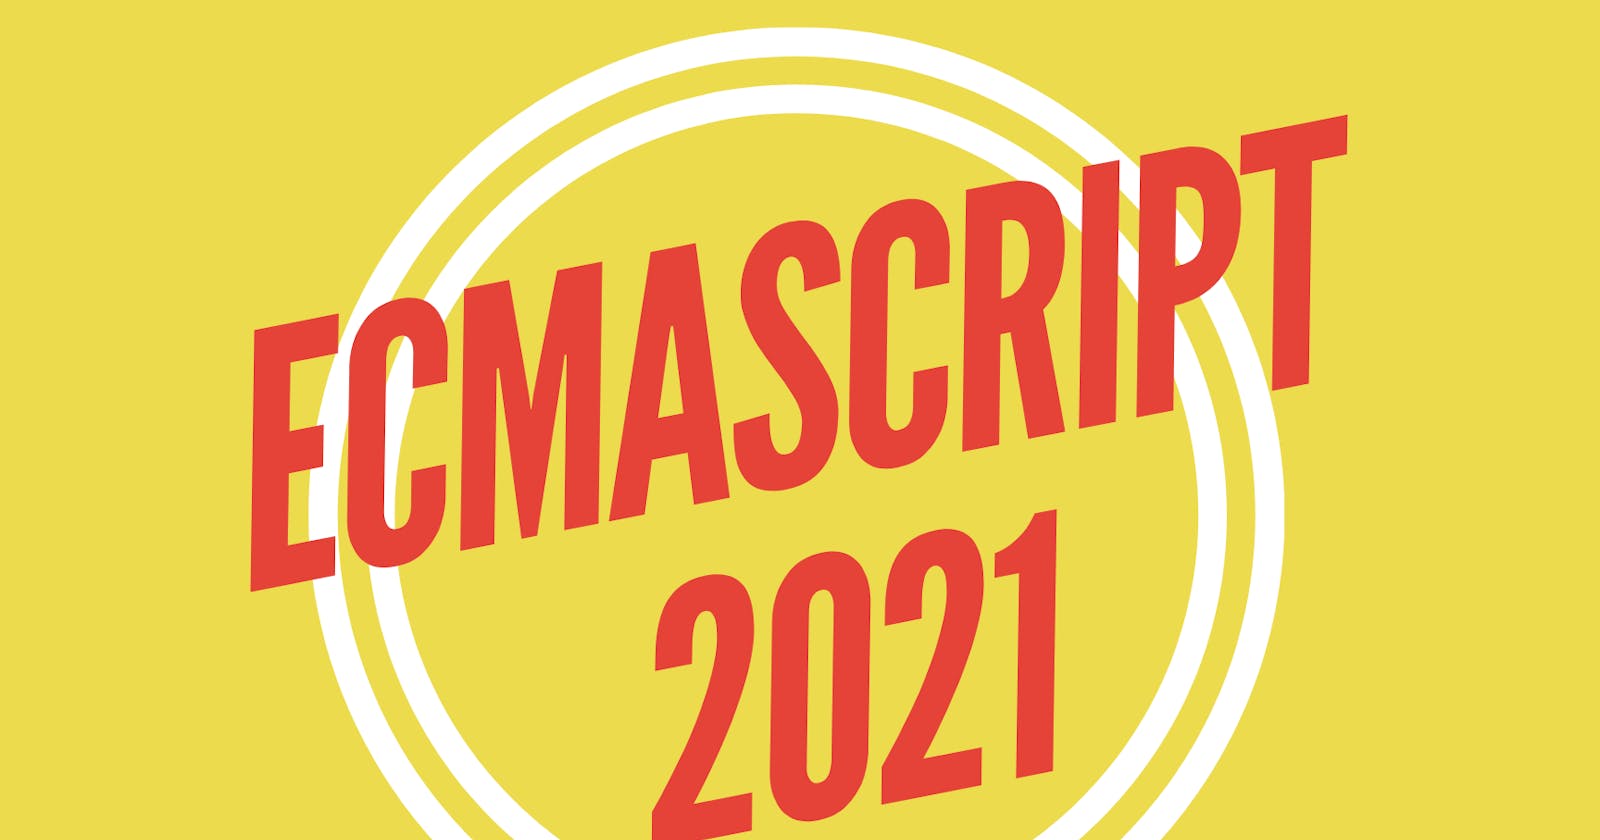 New ECMASCRIPT 2021 features with code examples